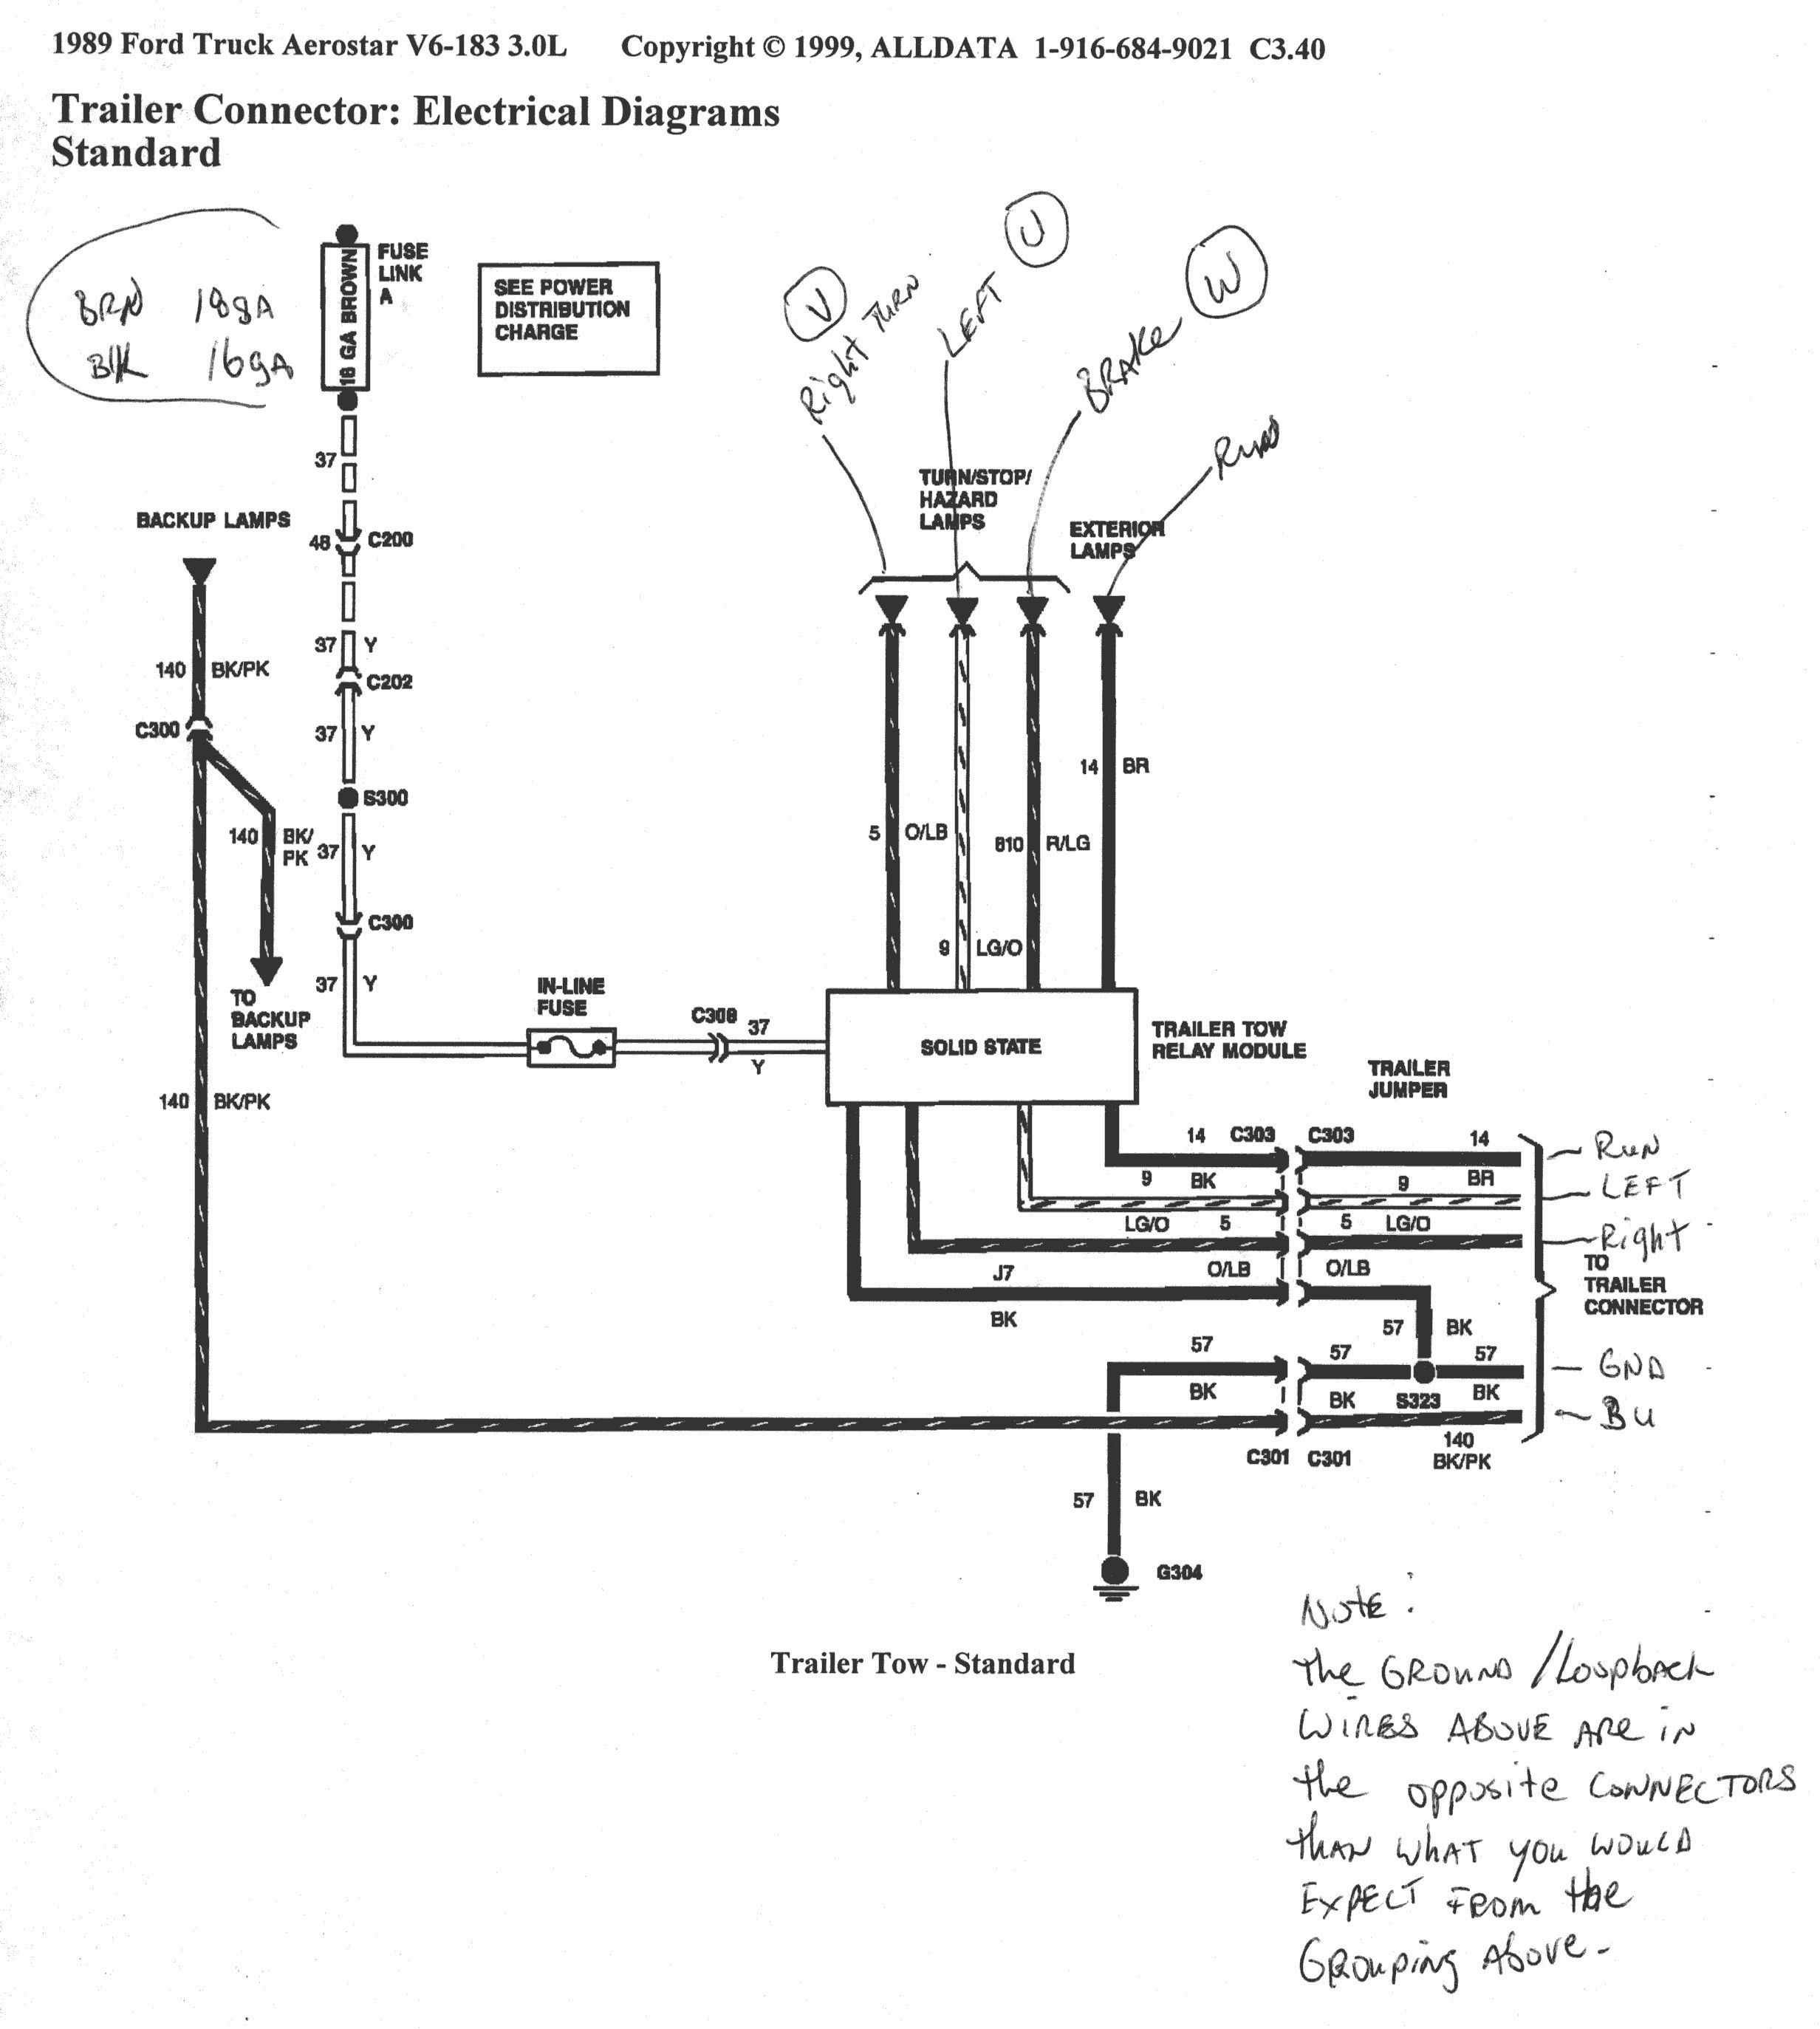 2000 Ford F250 Wiring Diagram from mainetreasurechest.com